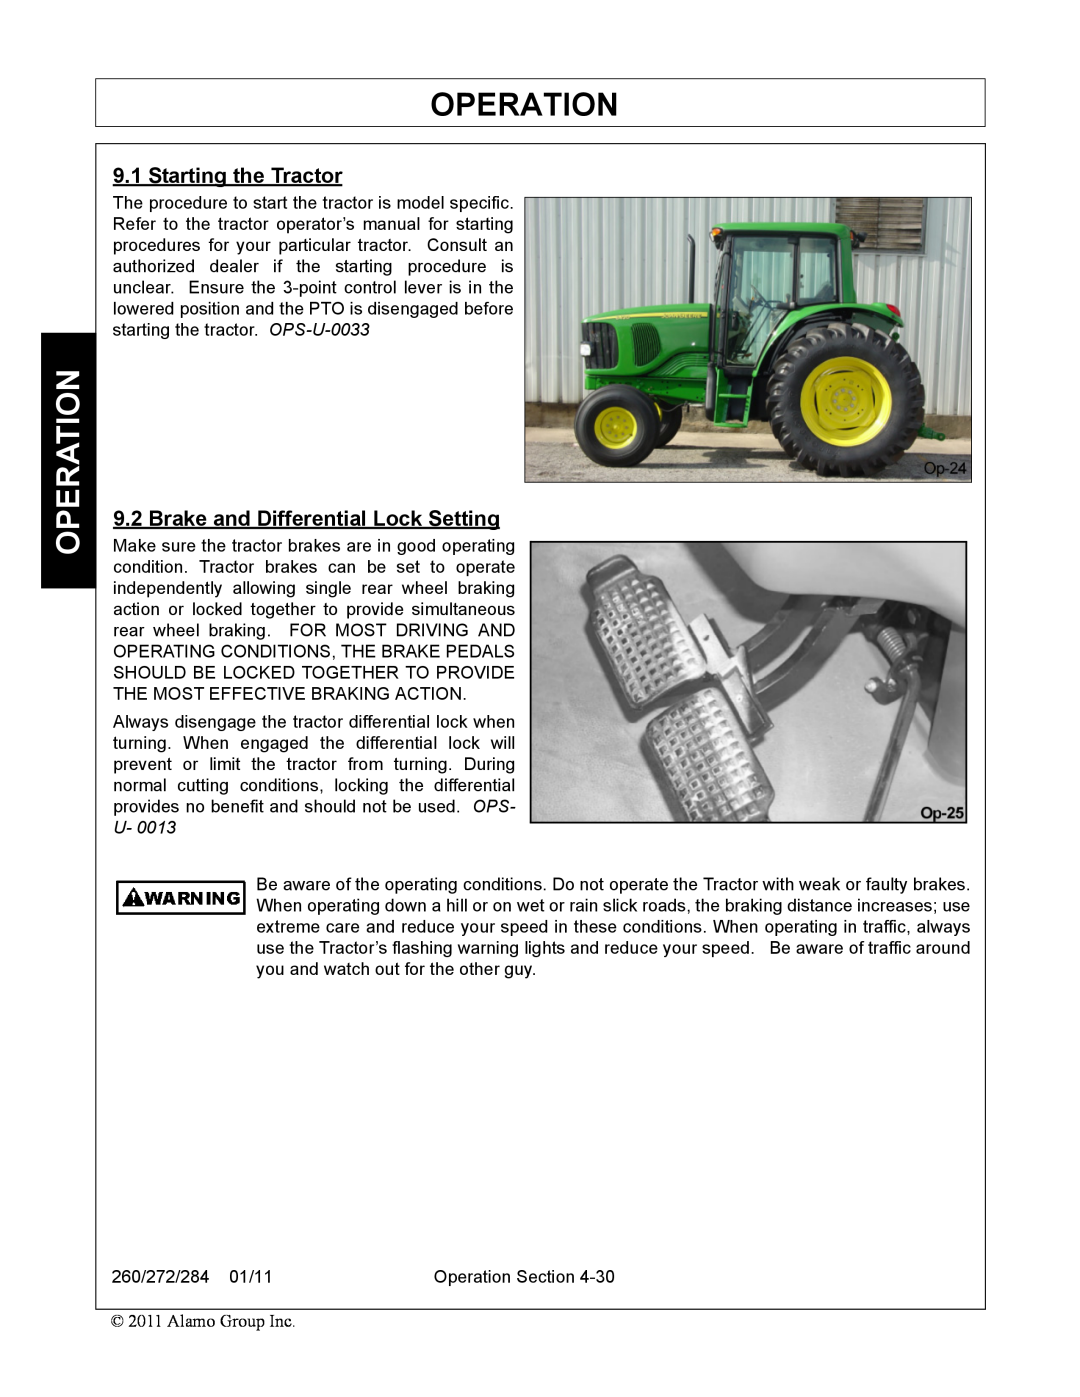 Alamo 260, 284, 272 manual Starting the Tractor, Brake and Differential Lock Setting, Operation 